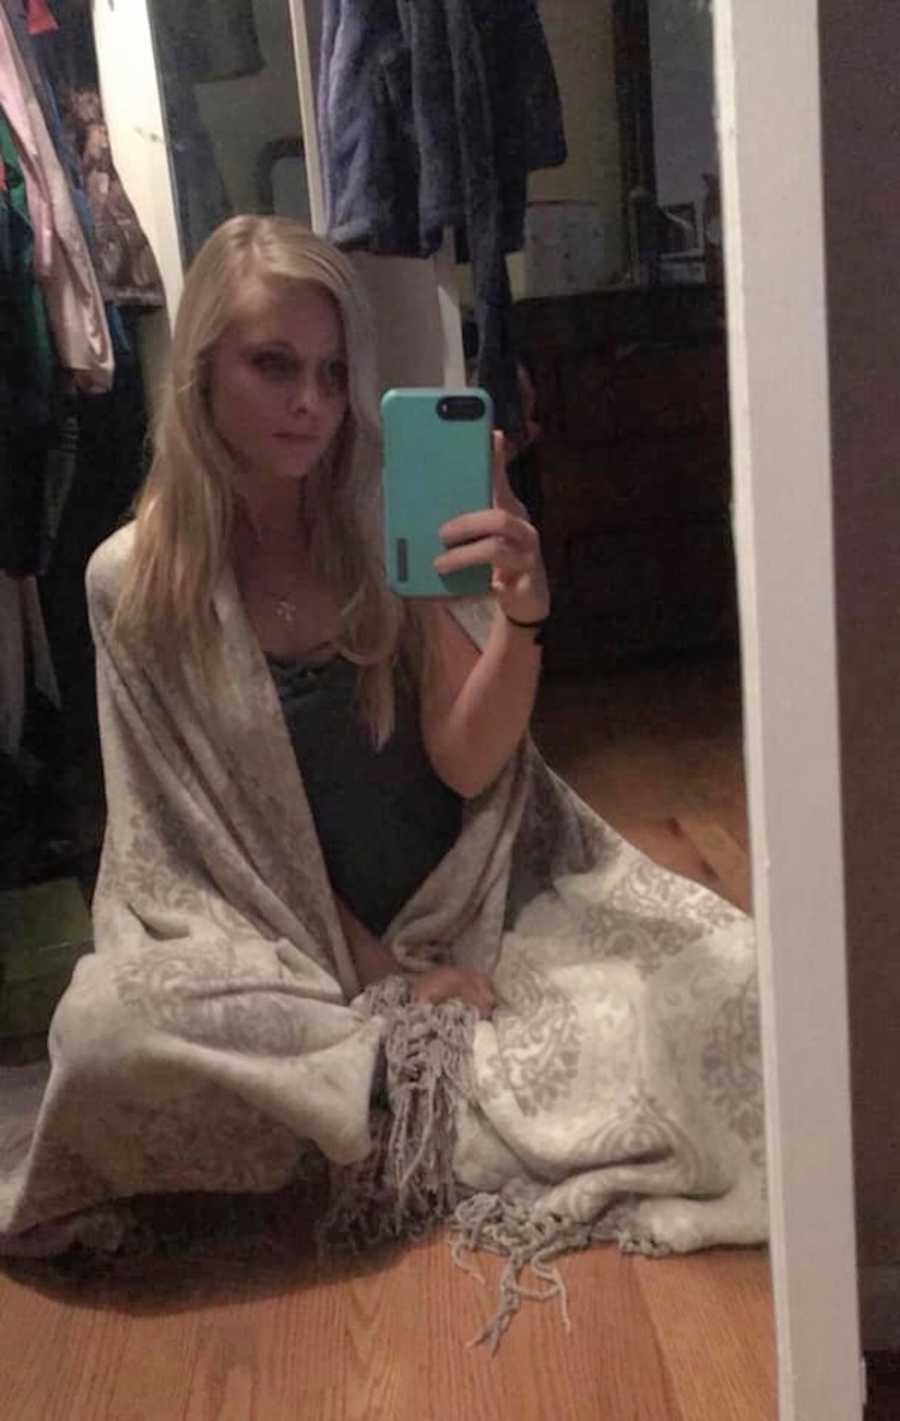 Woman who experienced emotional abused in relationship sits on floor wrapped in blanket taking mirror selfie